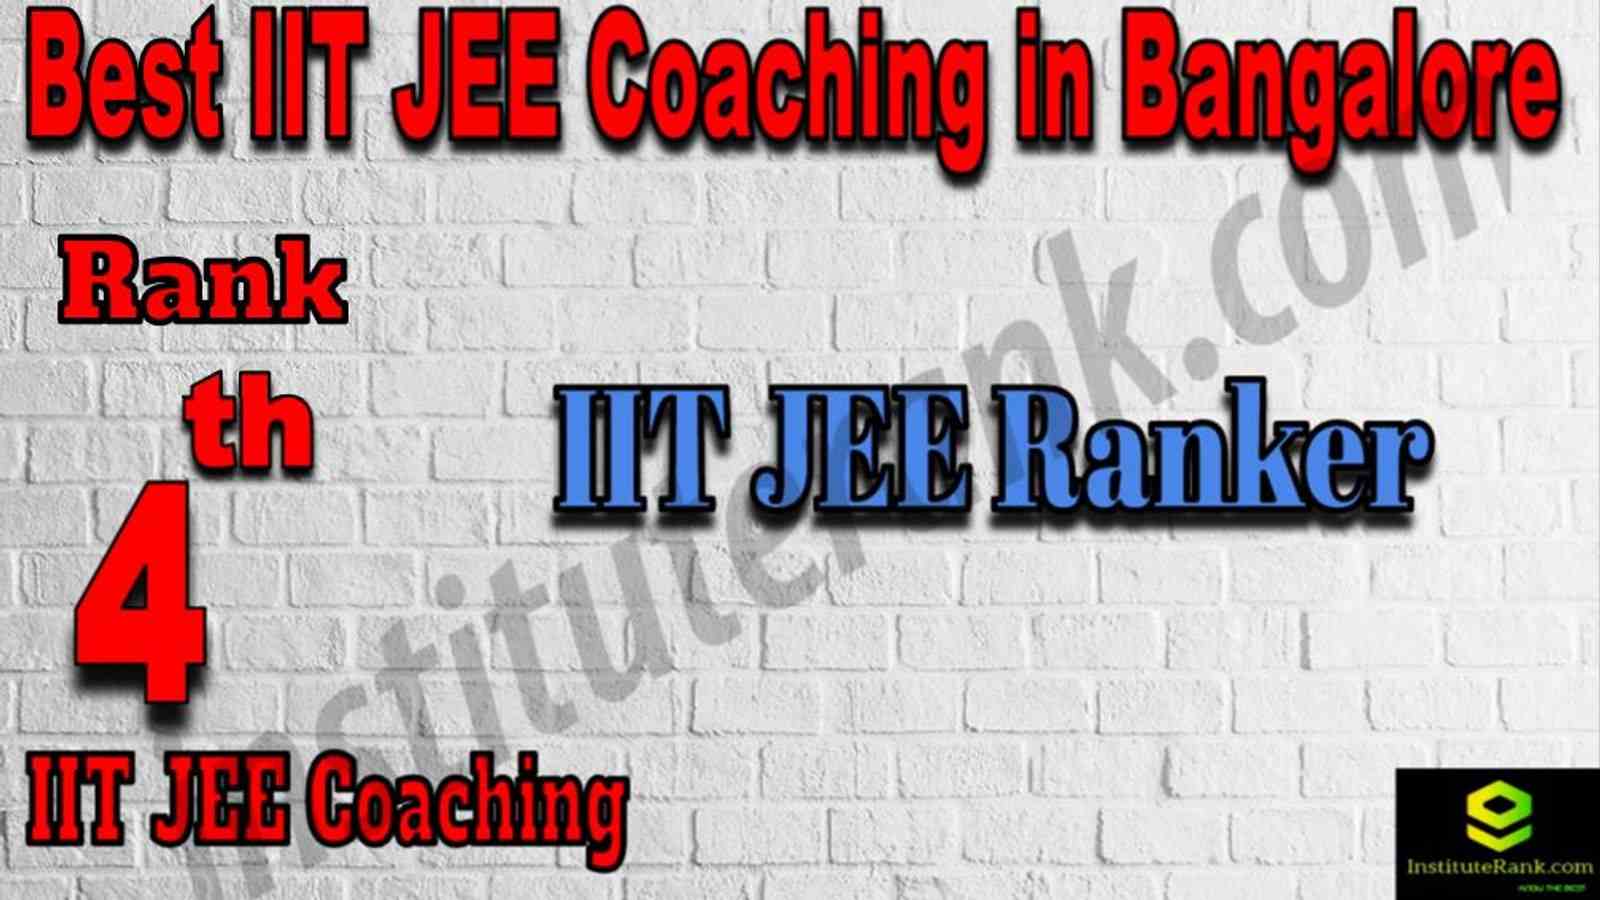 4th Best IIt Jee Coaching in Bangalore